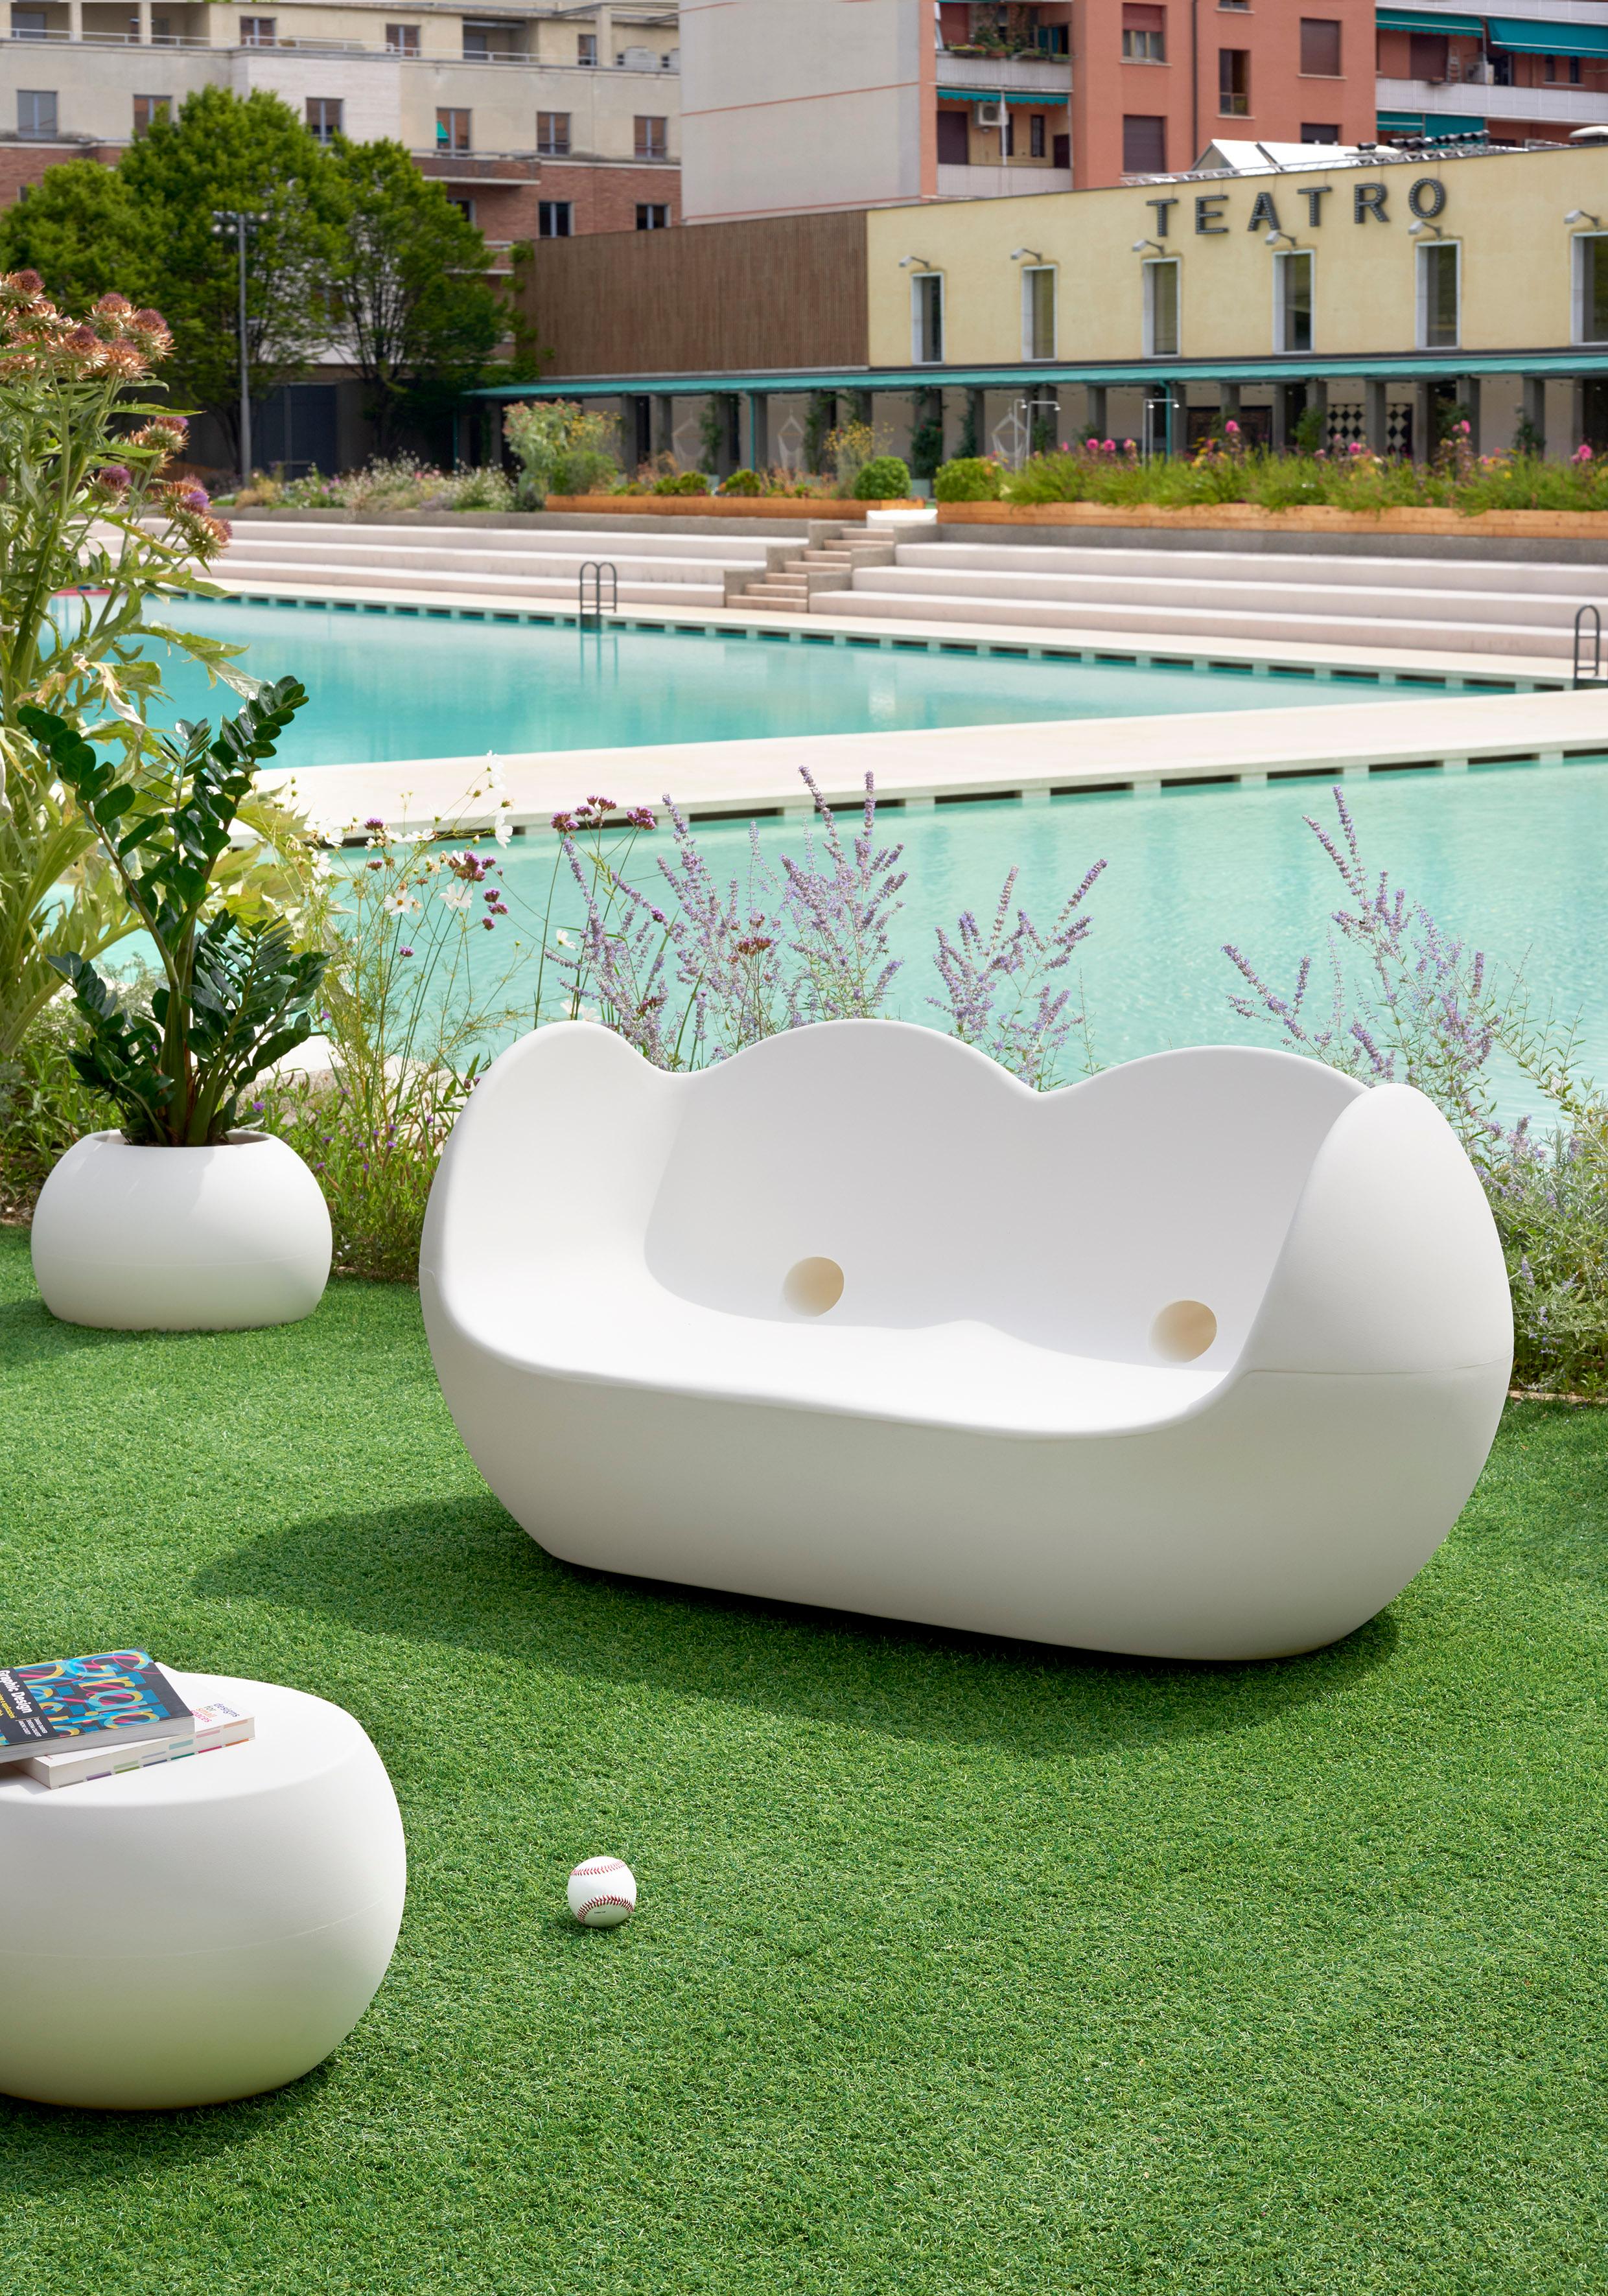 Lime Green Blossy Rocking Sofa by Karim Rashid
Dimensions: D 85 x W 159 x H 75 cm. Seat Height: 34 cm.
Materials: Polyethylene.
Weight: 38 kg.

Available in different color options. This product is suitable for indoor and outdoor use. Please contact